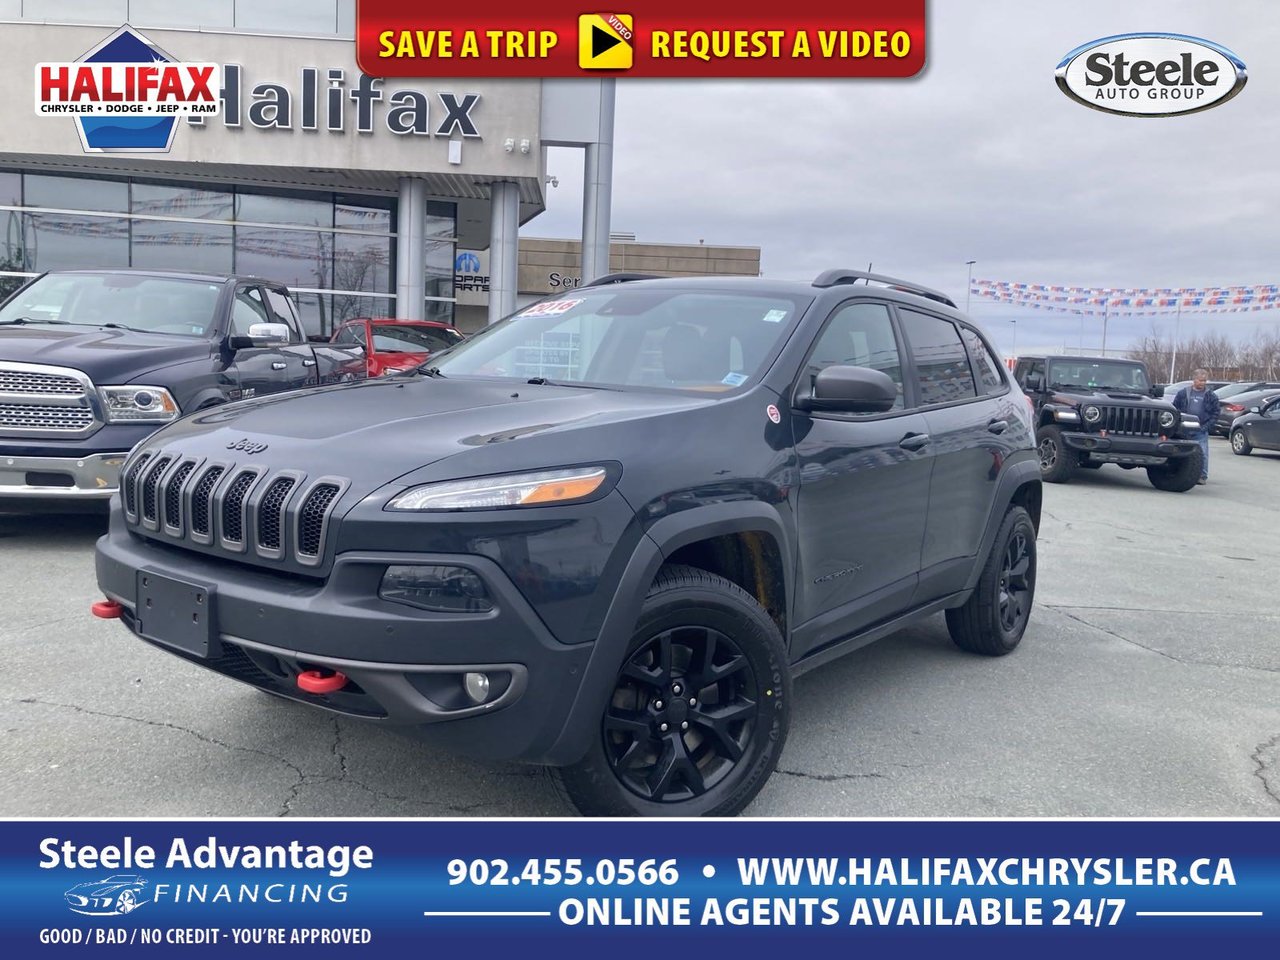 2016 Jeep Cherokee Trailhawk - NAV, HTD AND COOLED MEMORY LEATHER SEATS, PANORAMIC ROOF, SAFETY FEATURES,-0